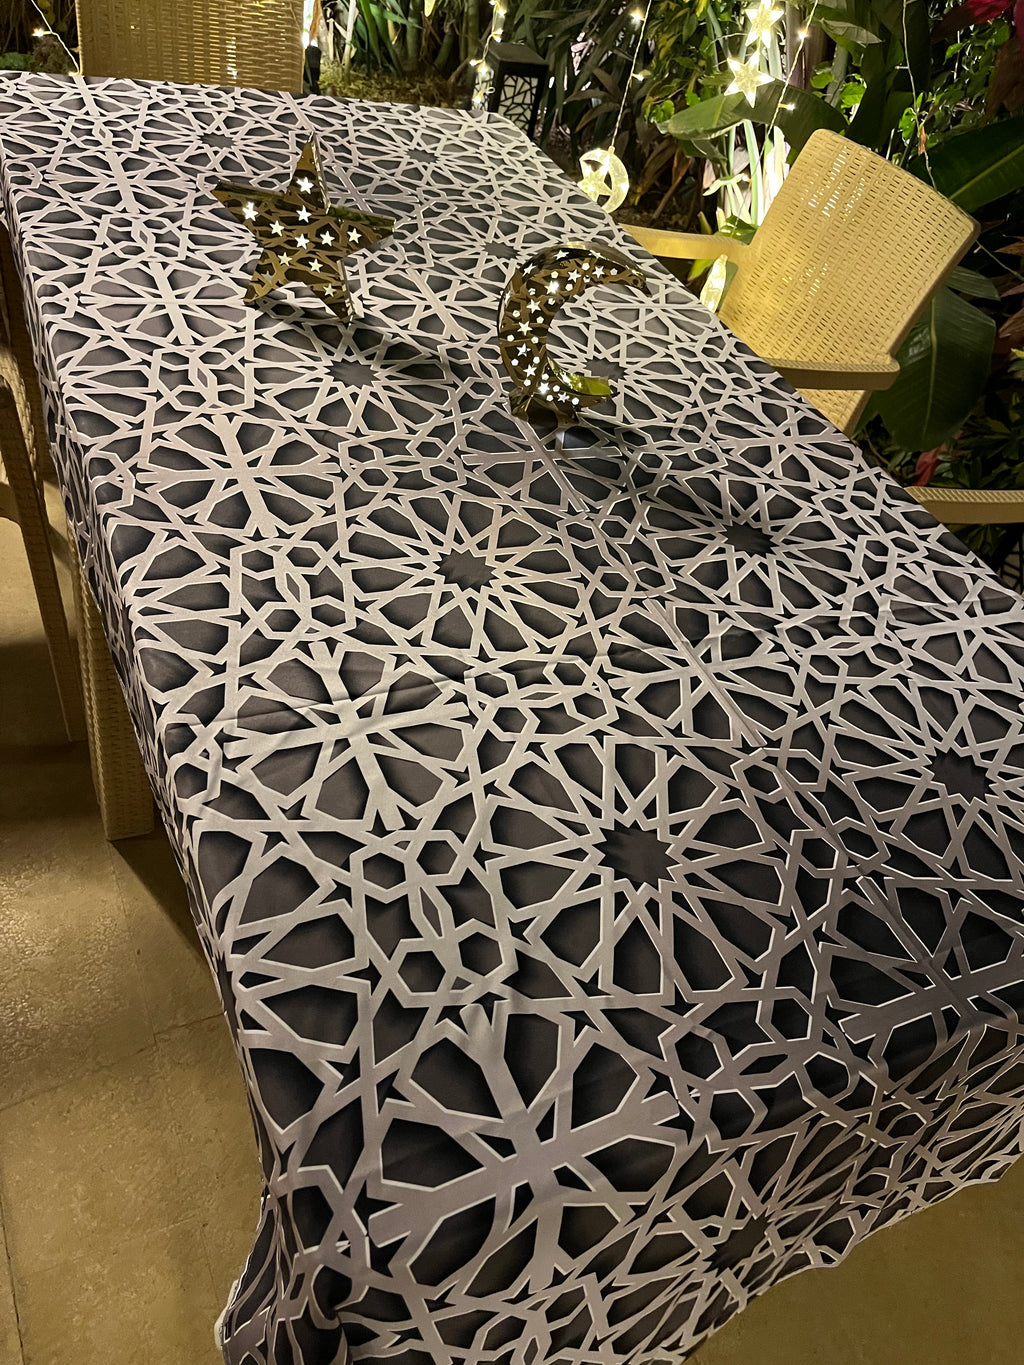 The 3D Islamic grey table cover